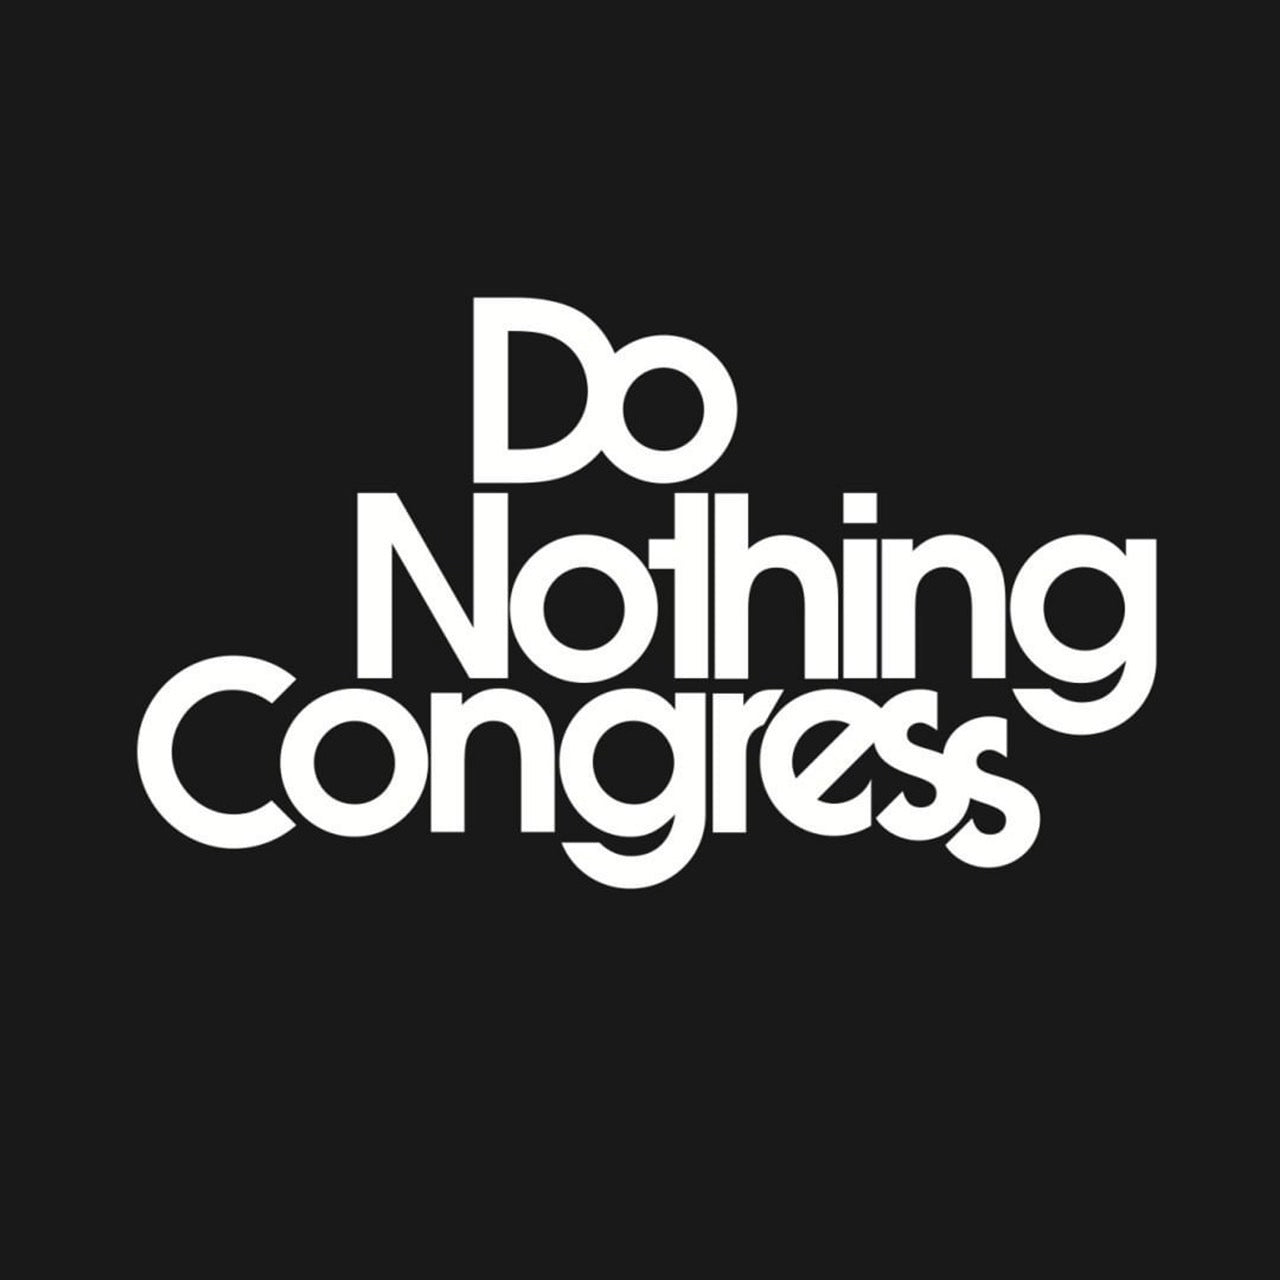 Do Nothing Congress -Champion eco- " A Cup of Tea " HOODIE / Do Nothing Congress